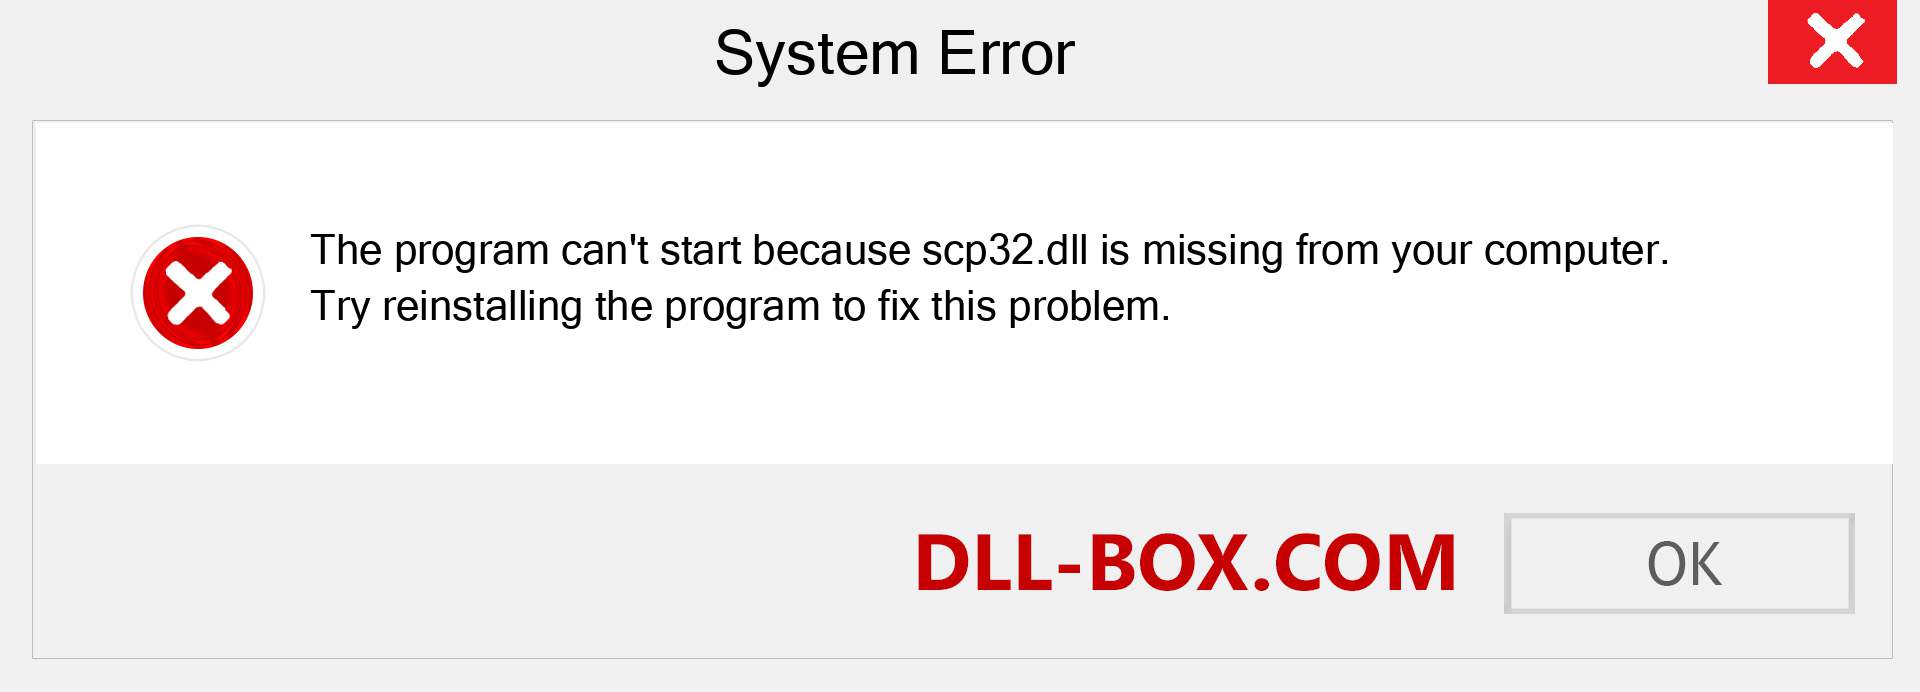  scp32.dll file is missing?. Download for Windows 7, 8, 10 - Fix  scp32 dll Missing Error on Windows, photos, images